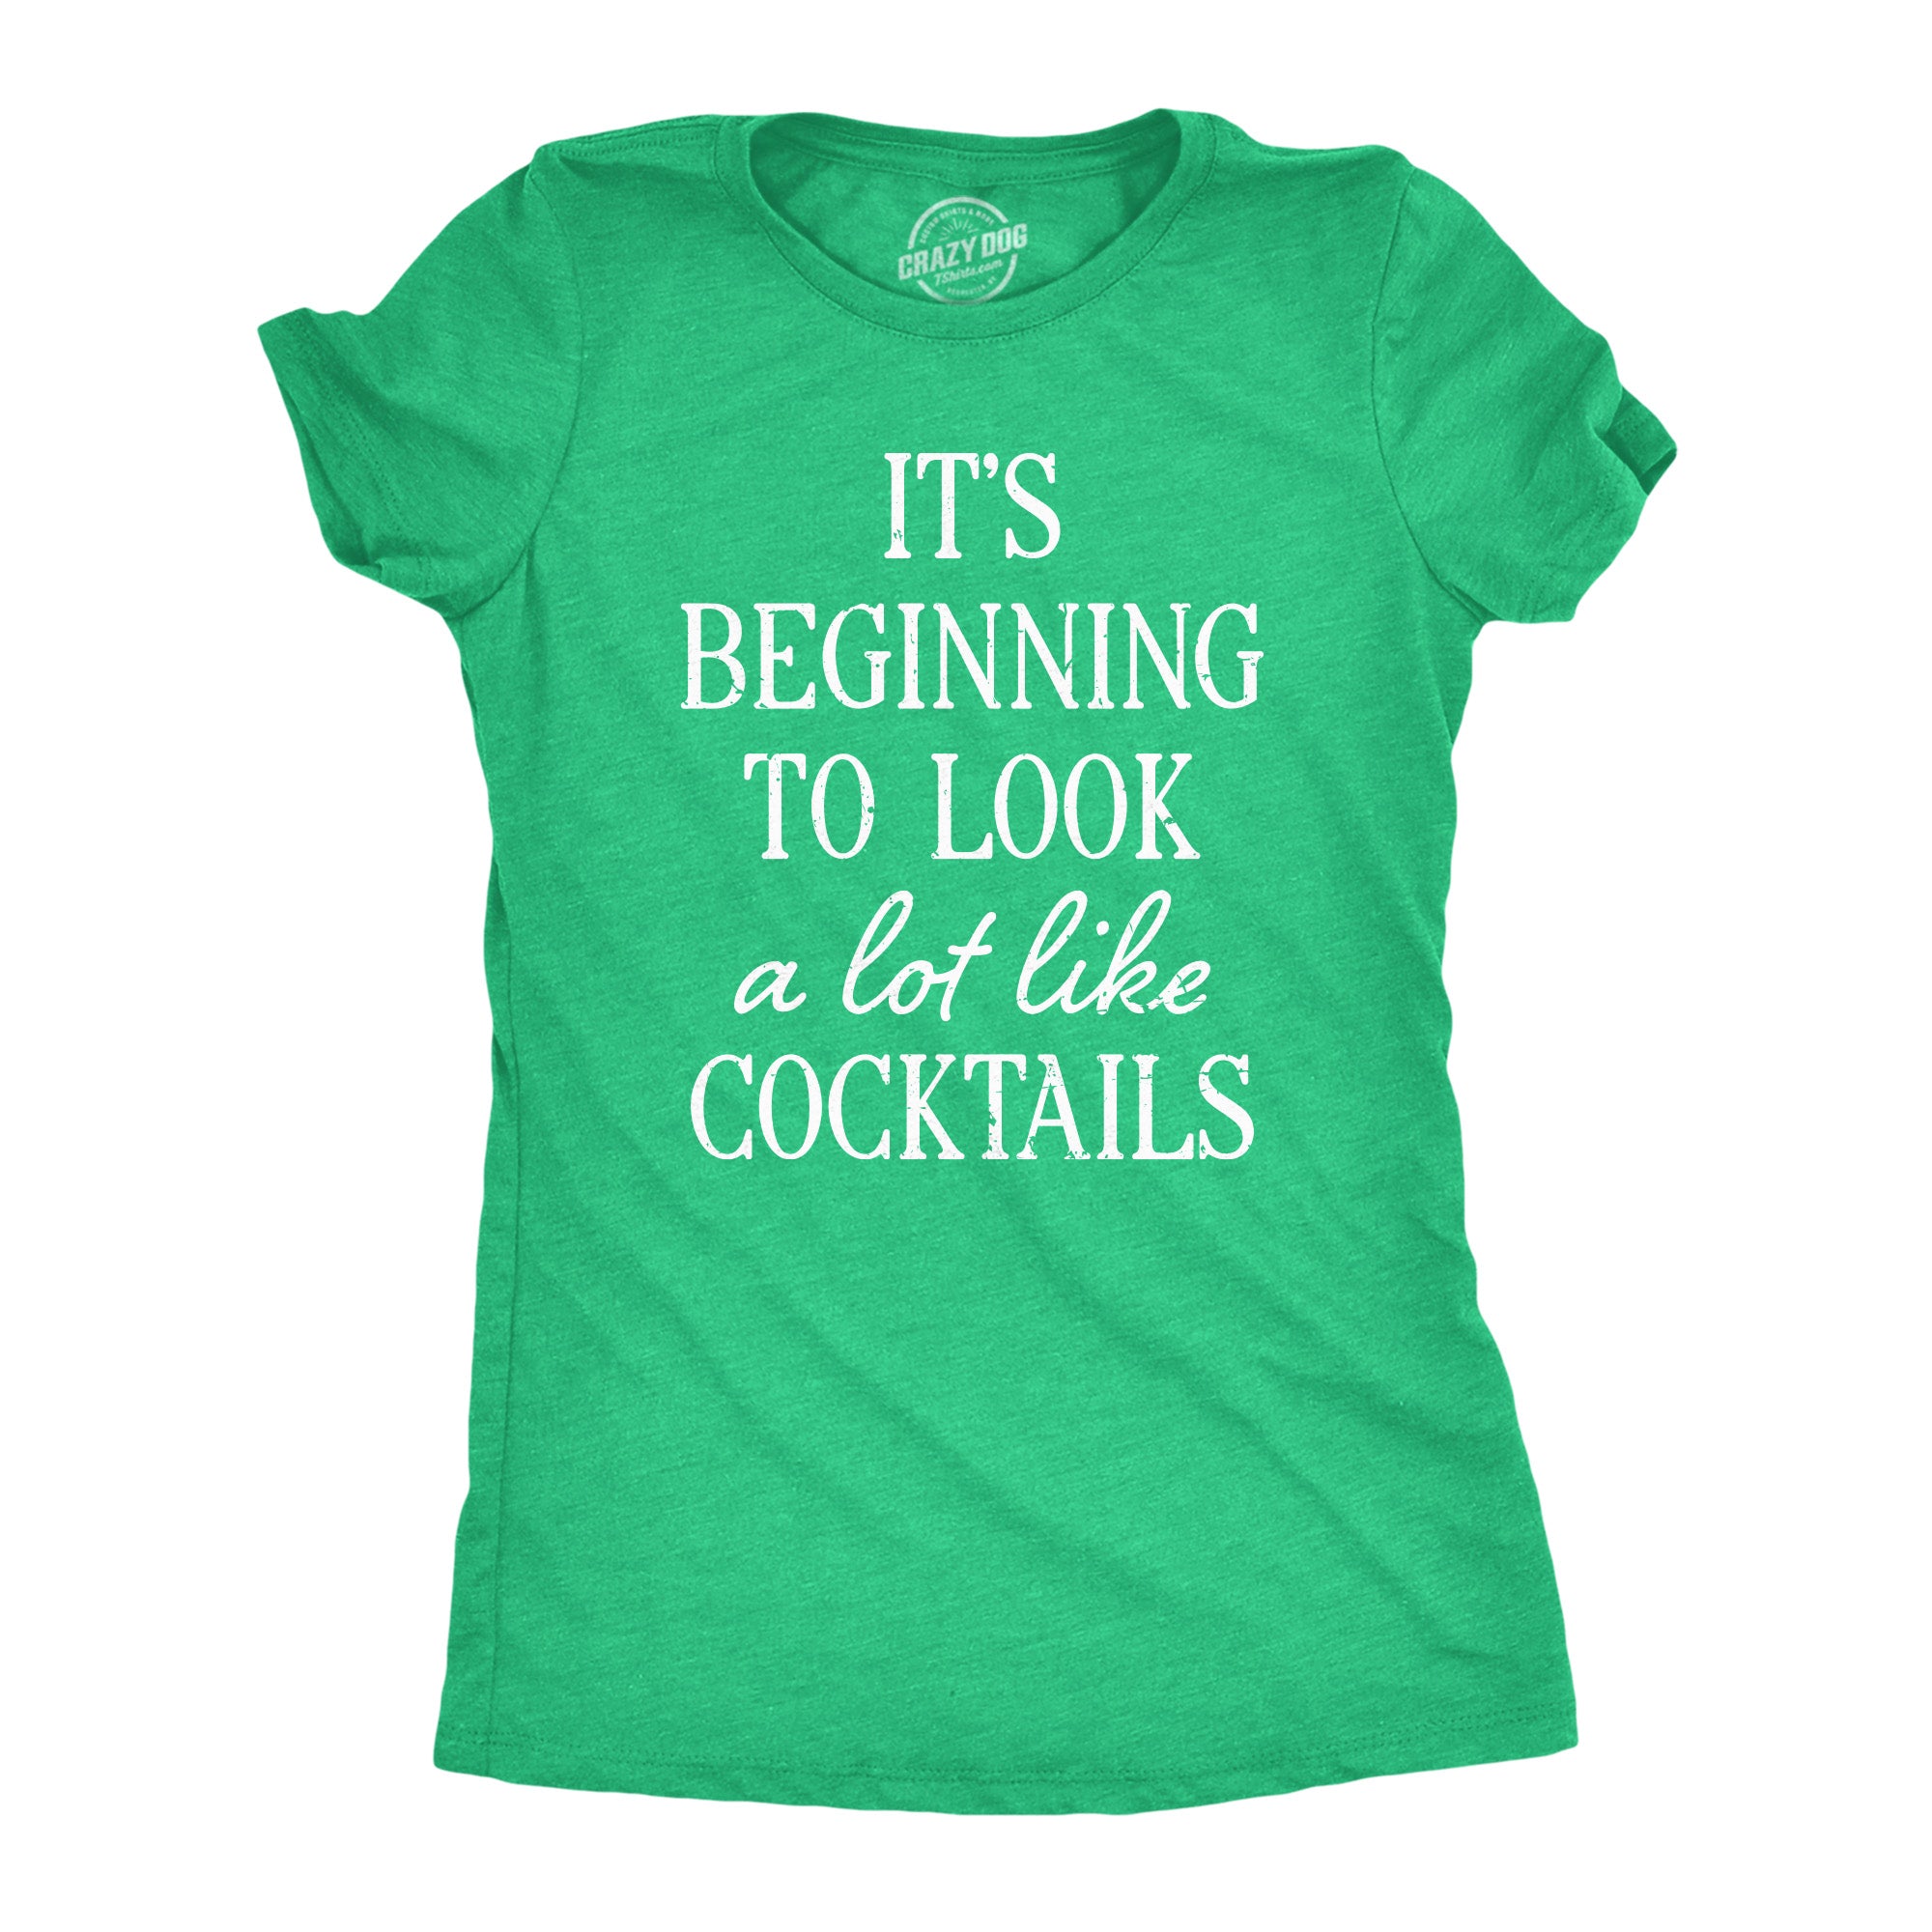 Funny Heather Green Its Beginning To Look A Lot Like Cocktails Womens T Shirt Nerdy Christmas Drinking Tee